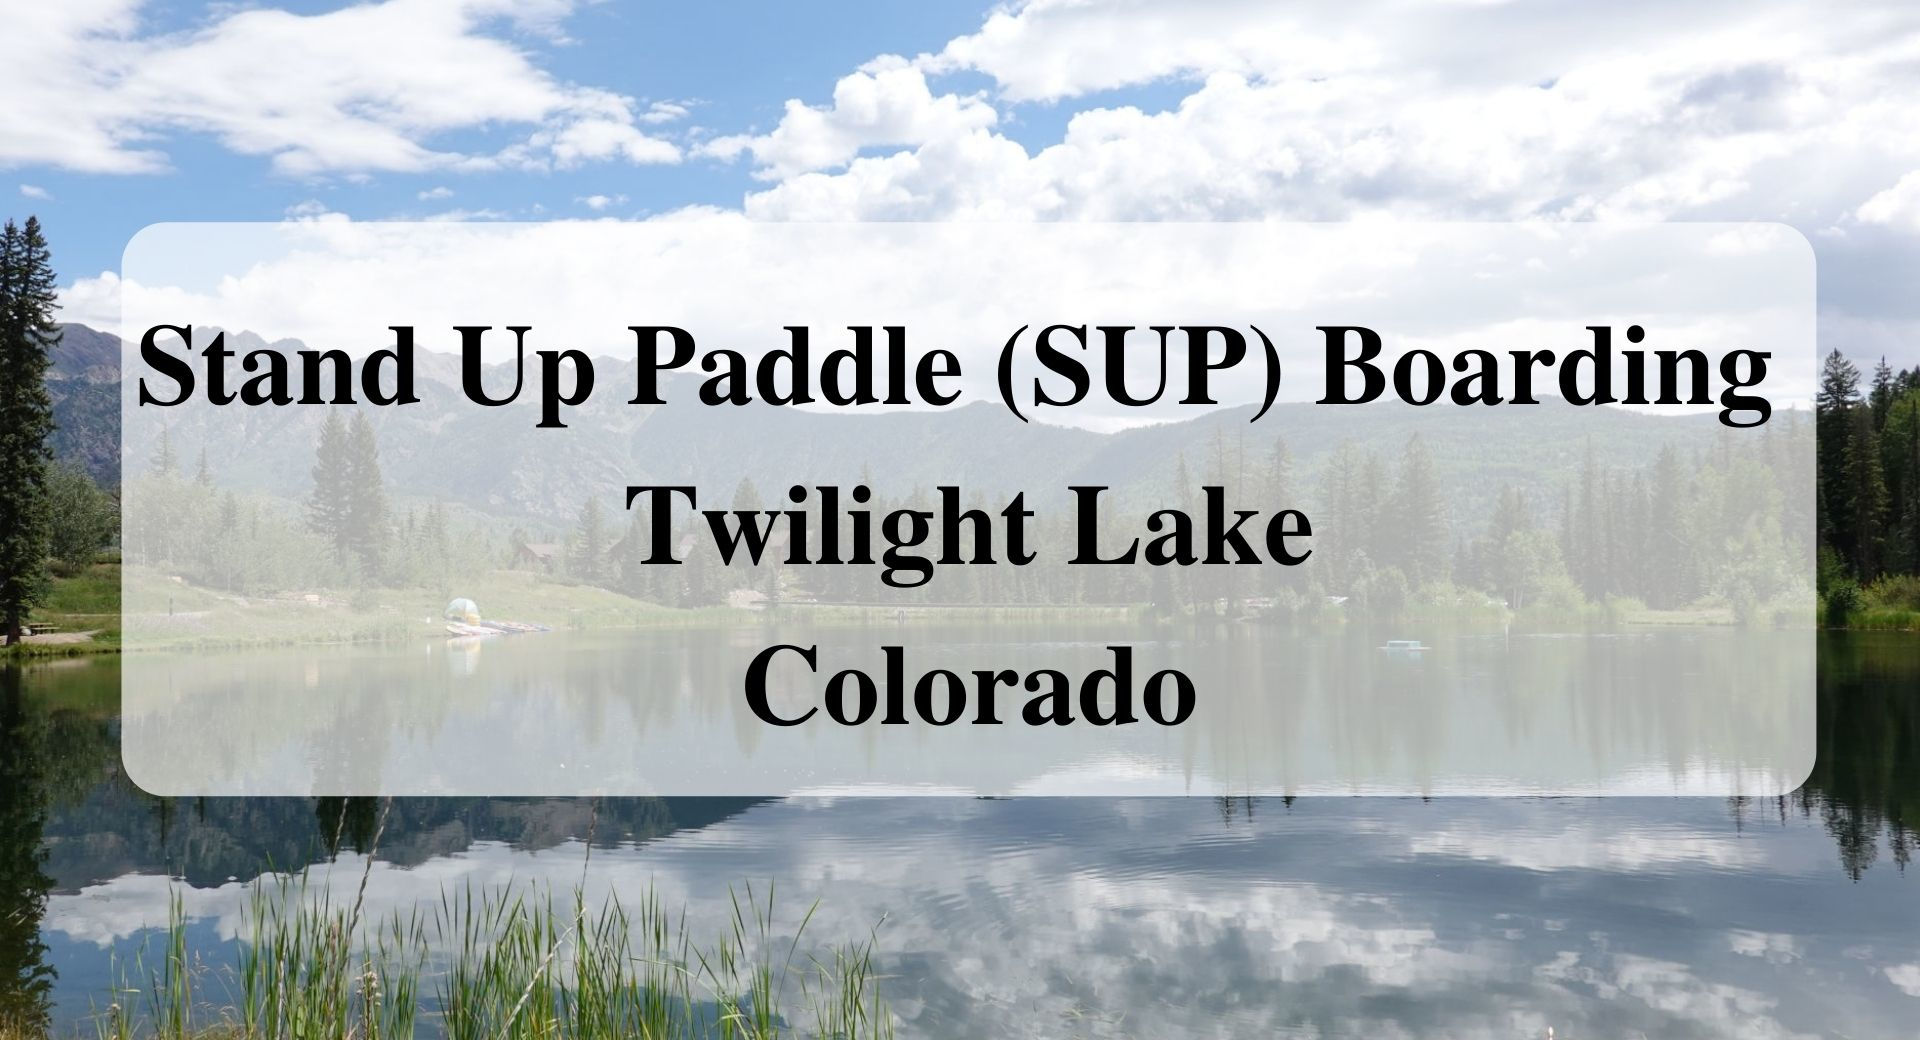 Stand Up Paddle (SUP) Boarding Twilight Lake Colorado forever sabbatical